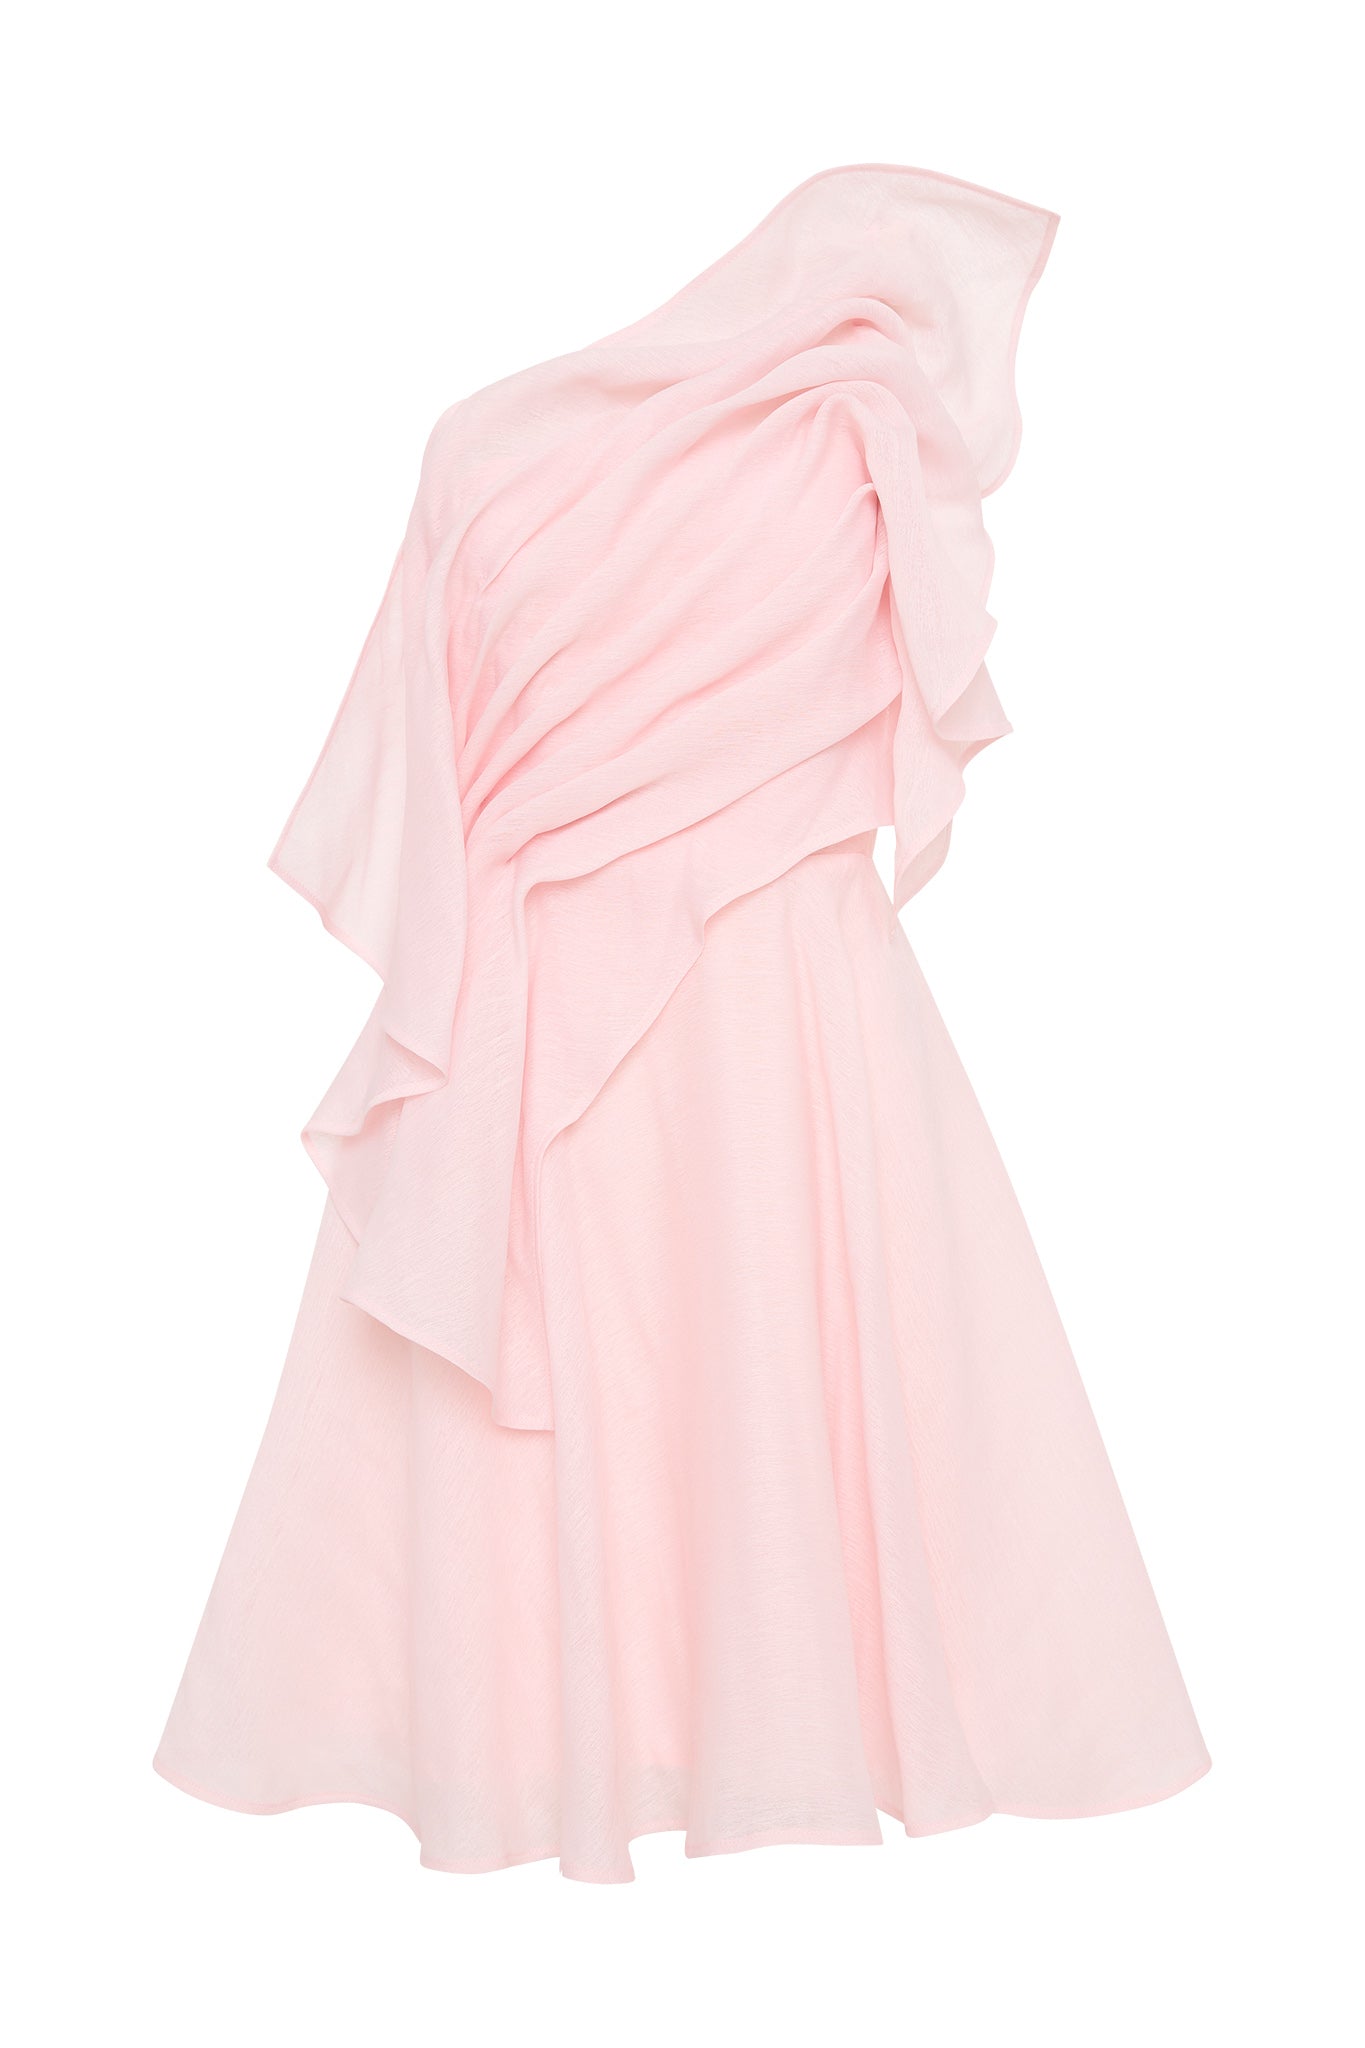 Grace White Pink Rose Dress from Viven of Holloway